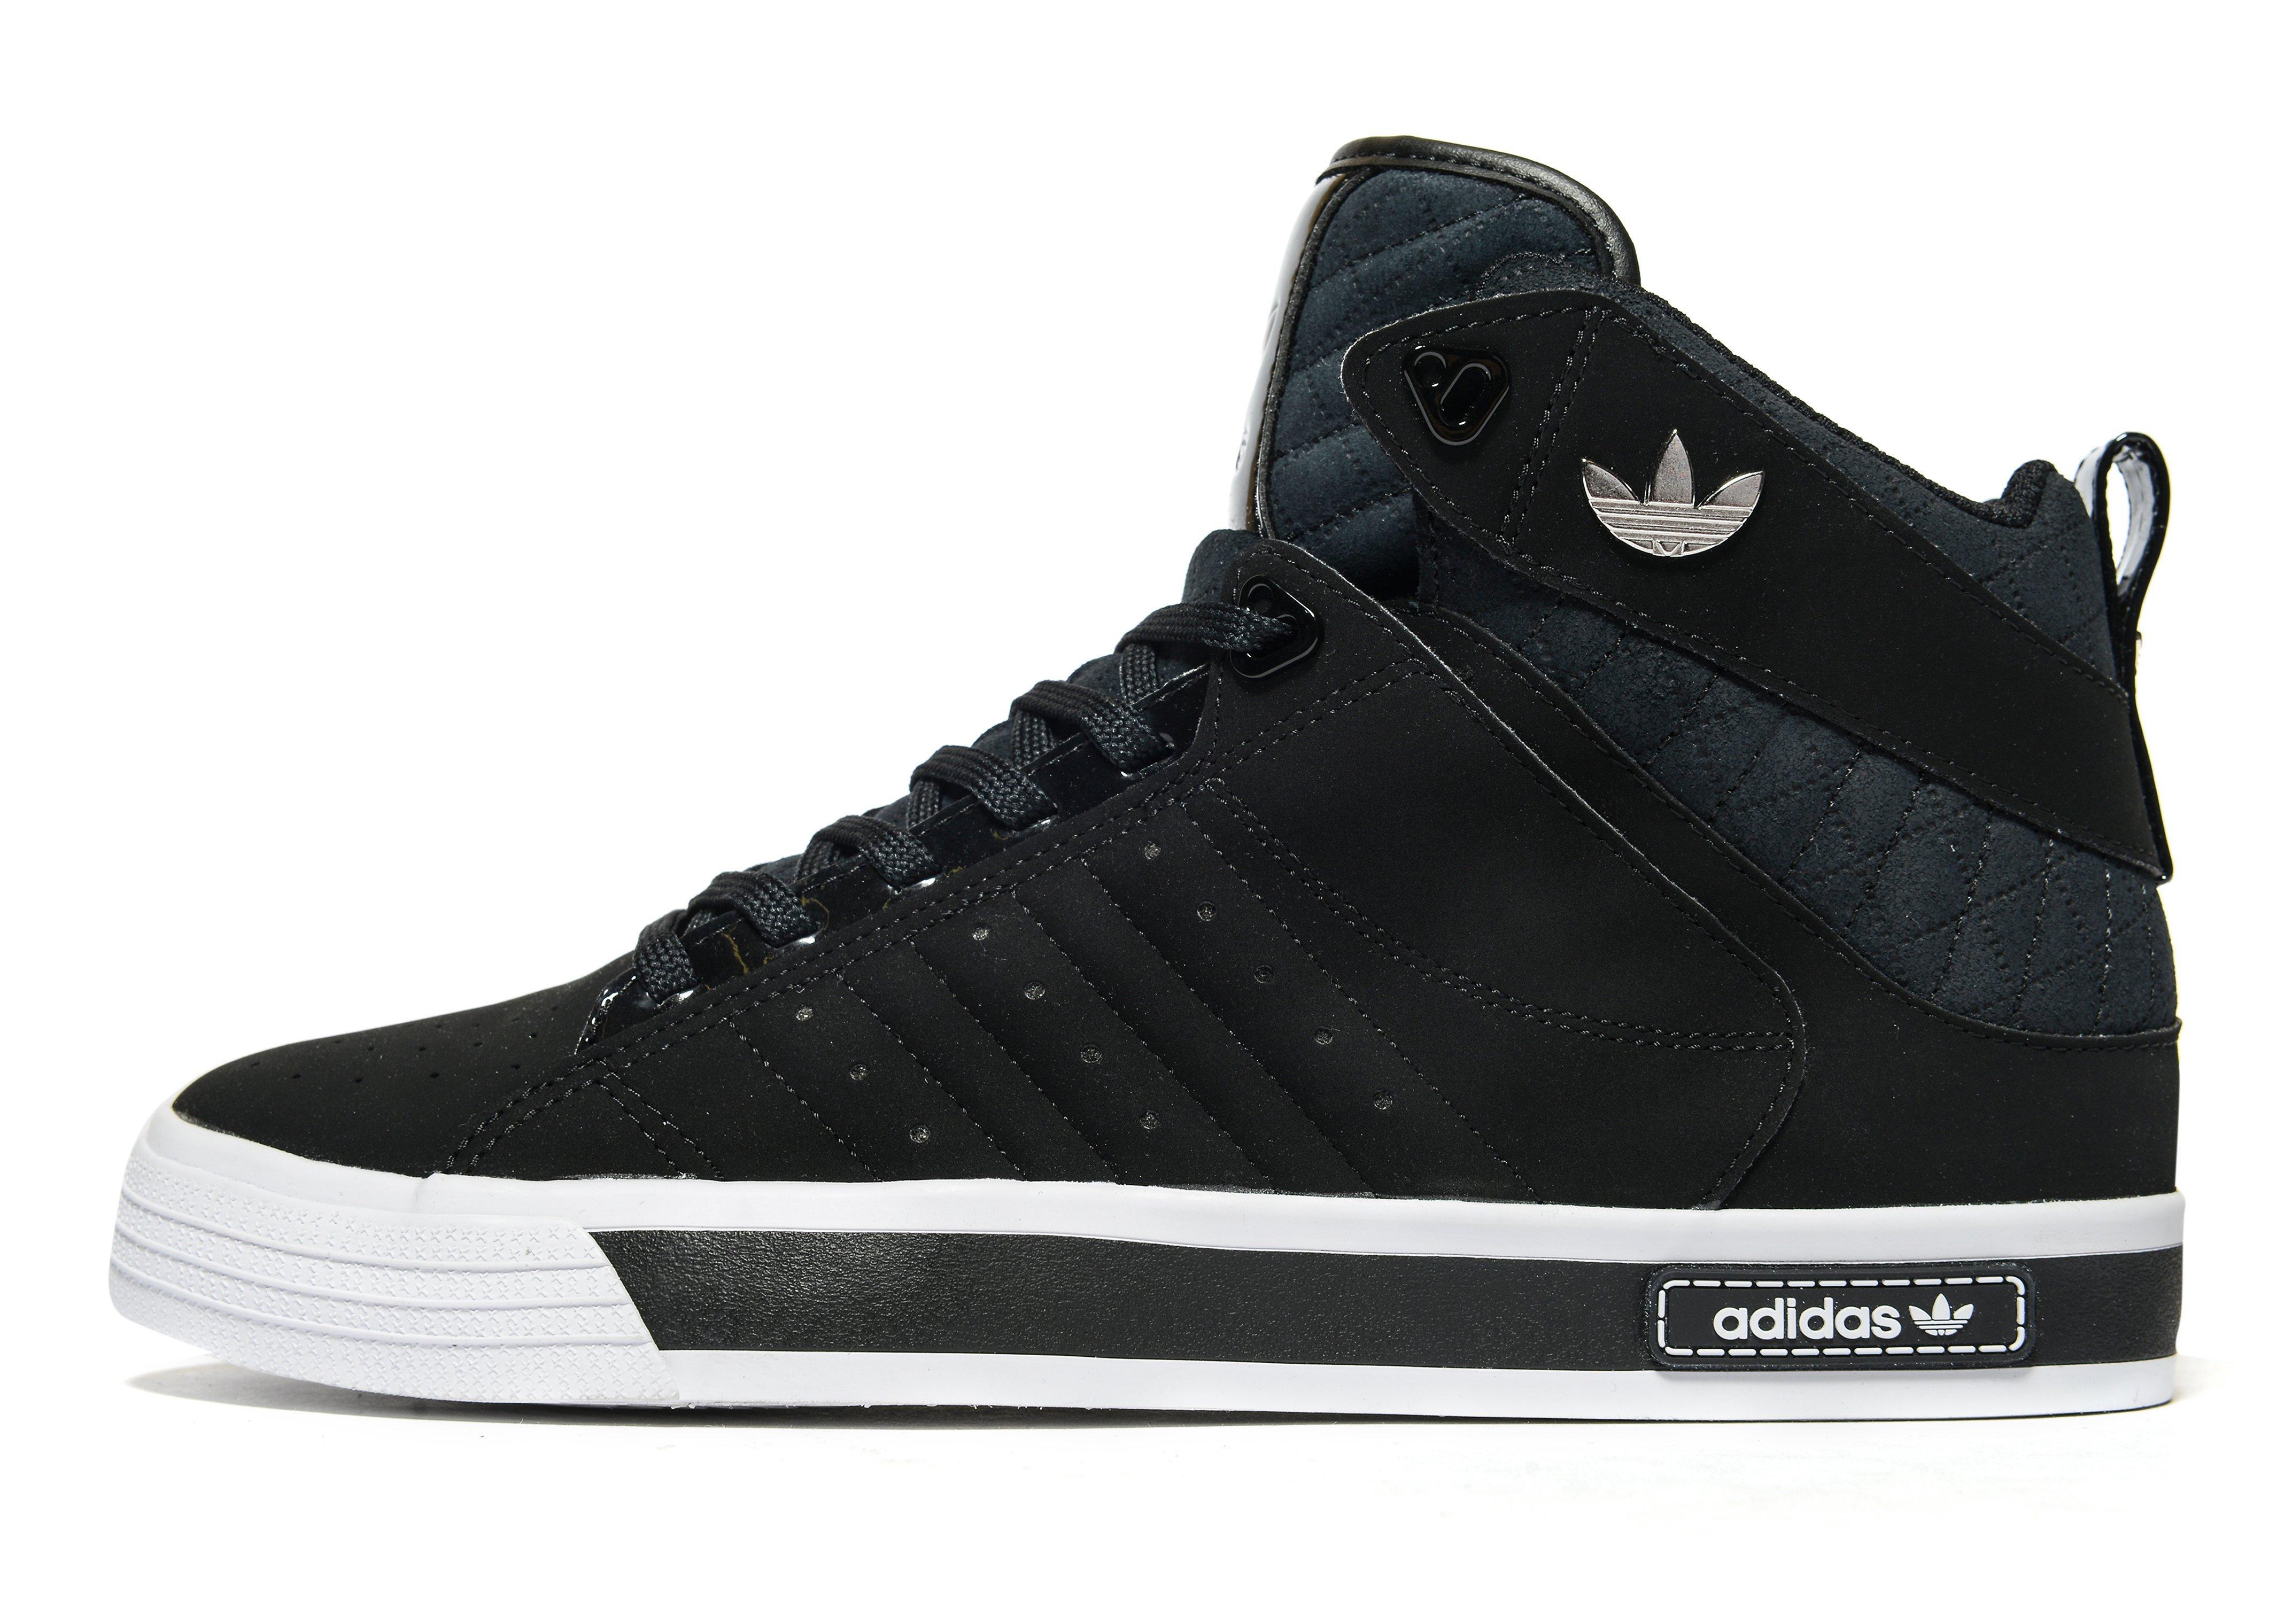 adidas freemont mid black leather mens trainers